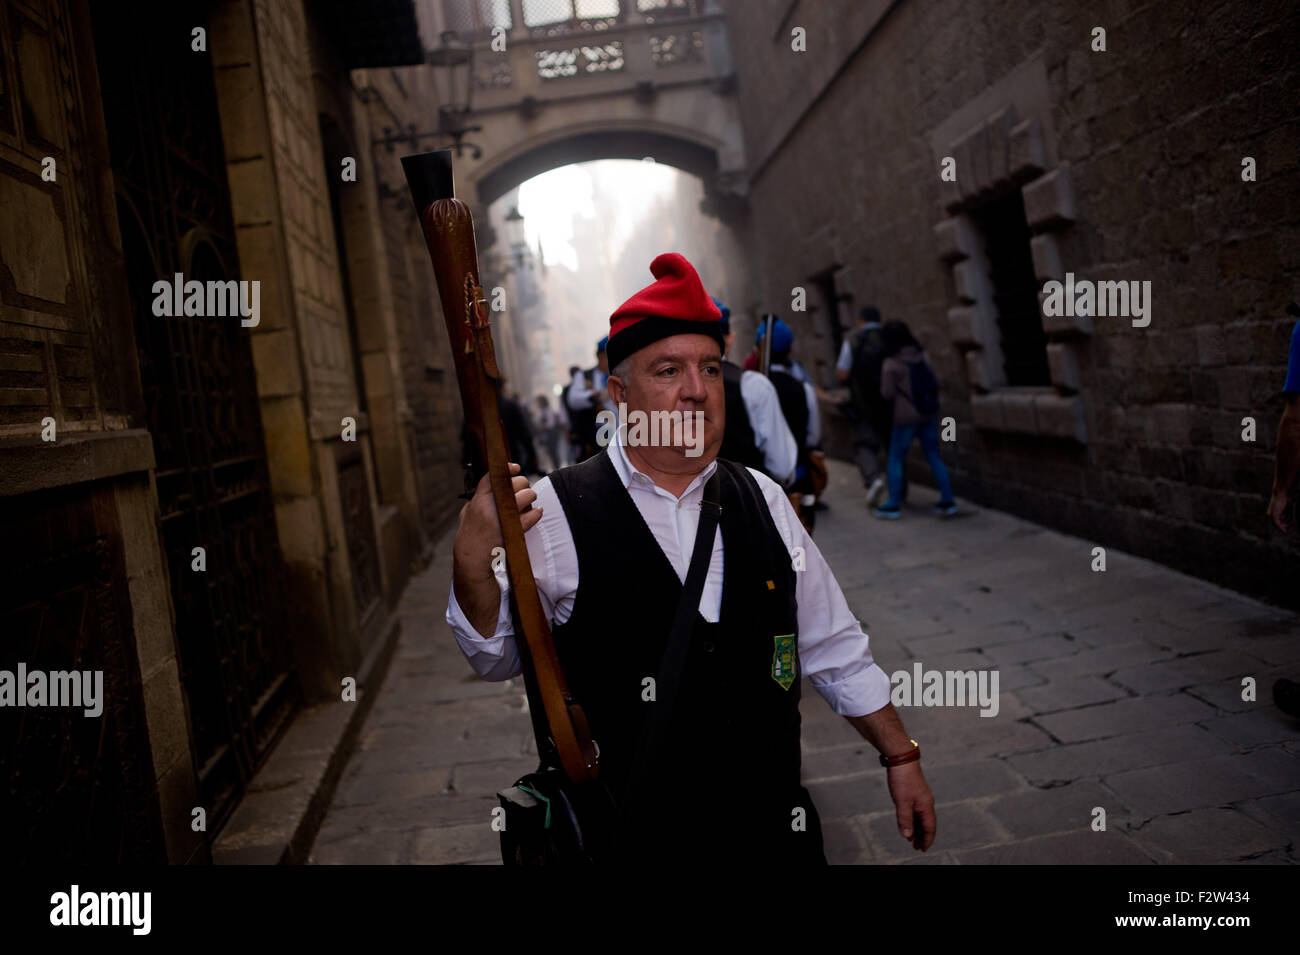 Barcelona, Catalonia, Spain. 24th Sep, 2015. A trabucaire through the streets of Barcelona on the occasion of the celebrations of the Merce Festival (Festes de la Merce) on 24 September 2015, Spain. The Galejada Trabucairemarks the beginning of the day of the patron saint of Barcelona, La Merce. Men and women dressed as ancient Catalan bandits take to the streets of the old part of Barcelona and cause a loud noise with his blunderbusses full of gunpowder. © Jordi Boixareu/ZUMA Wire/Alamy Live News Stock Photo